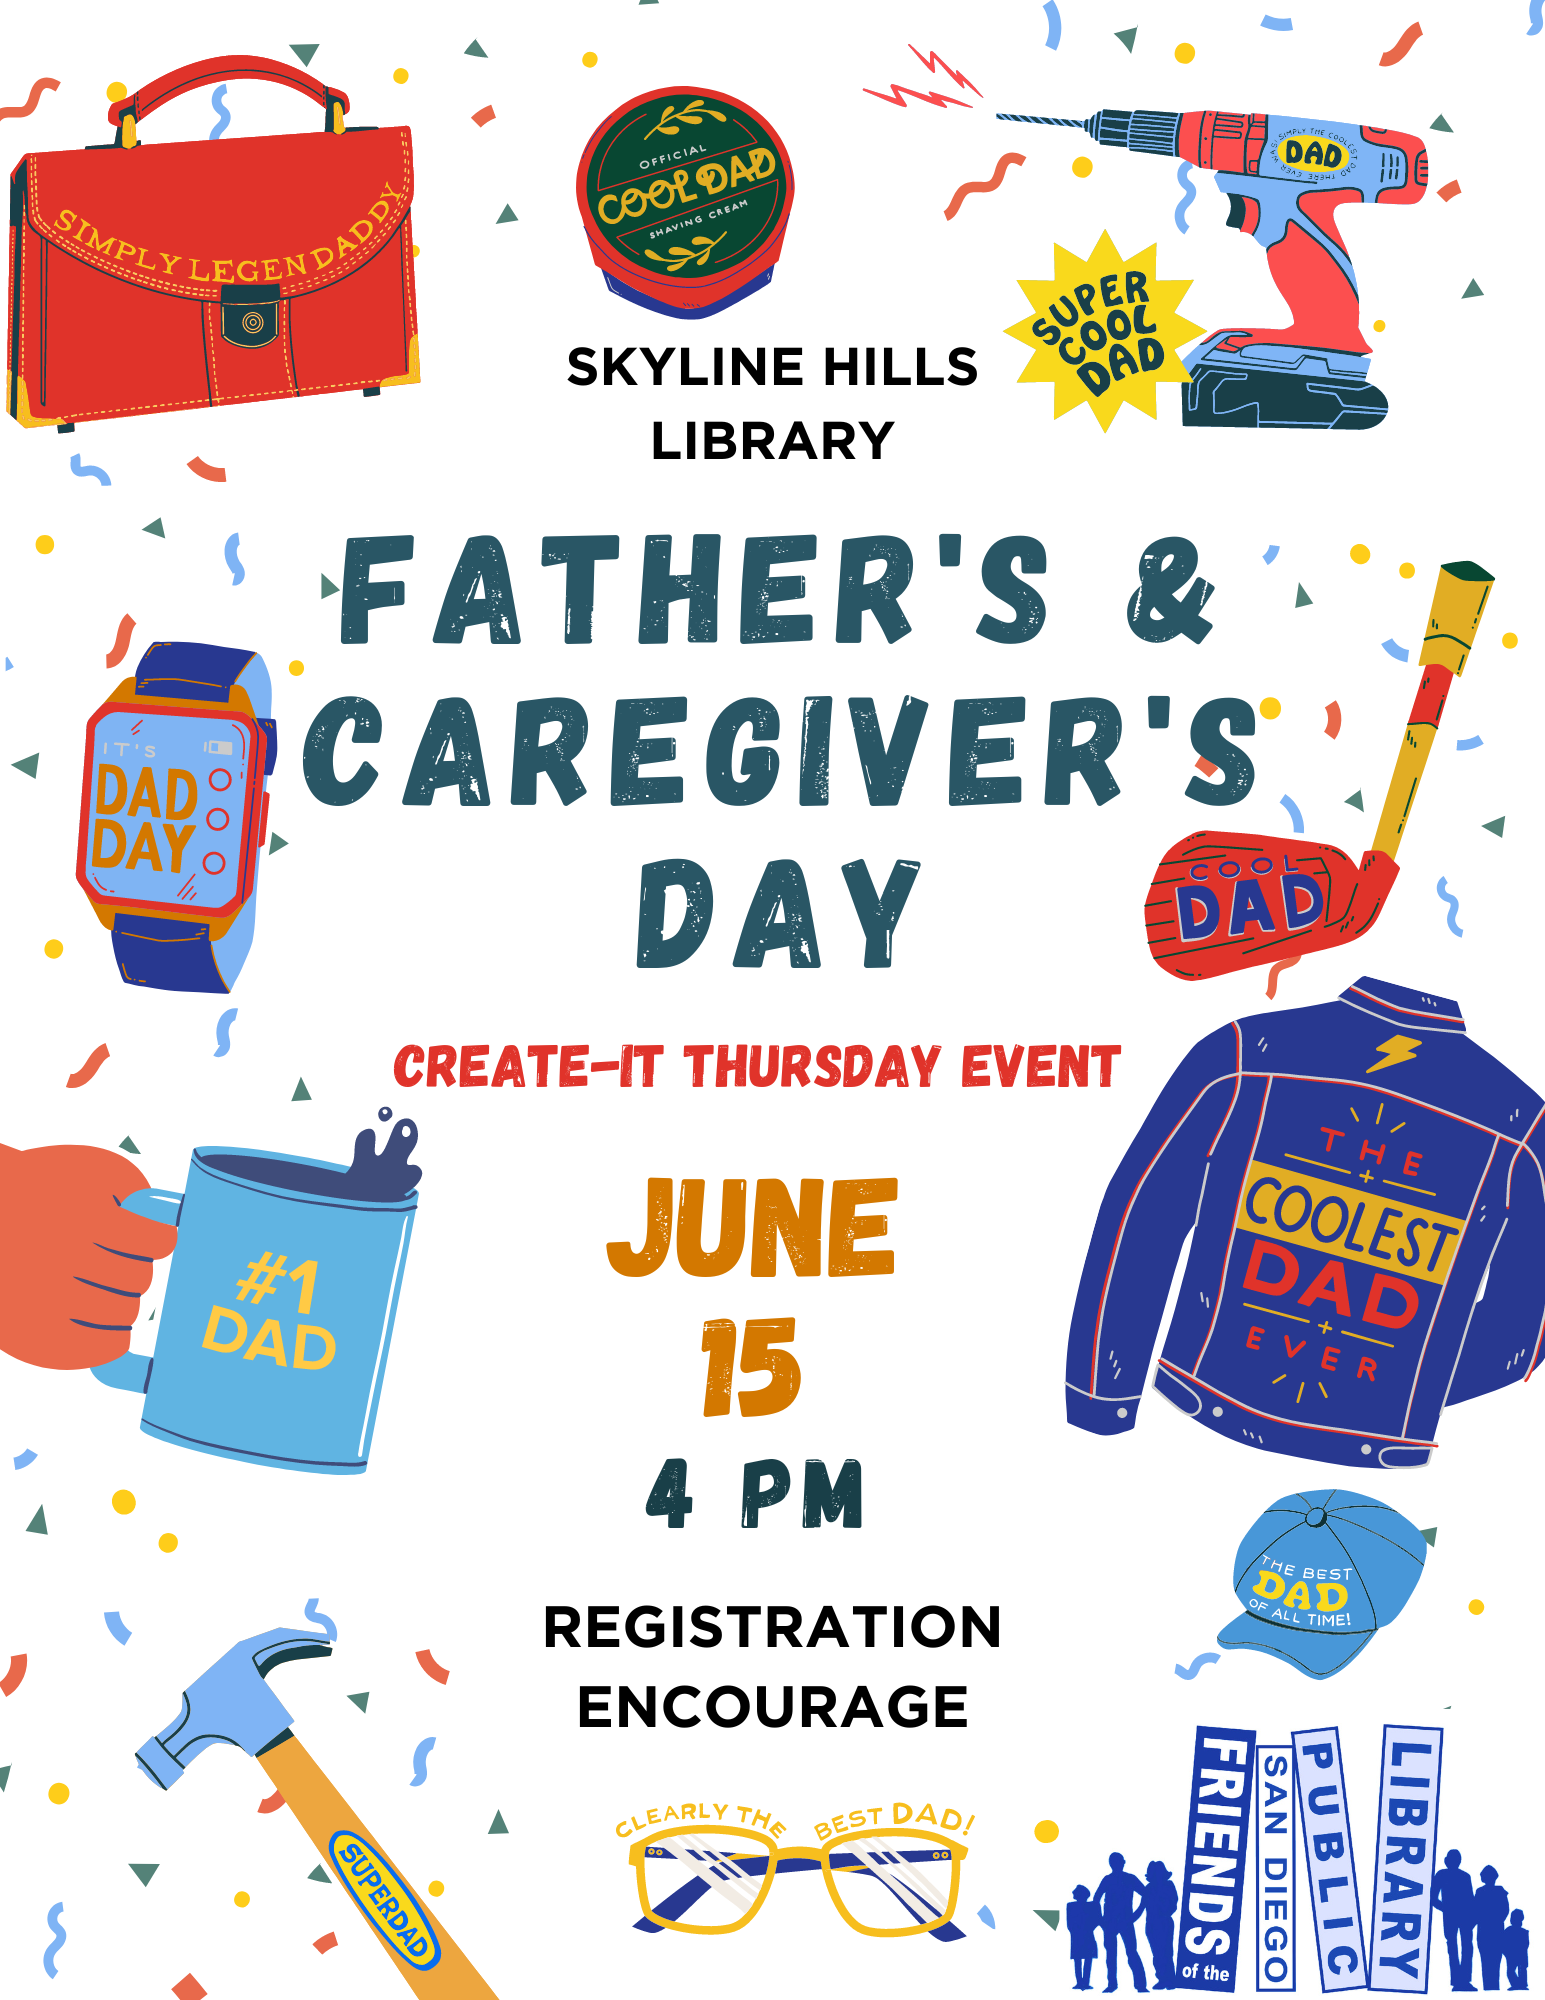 Father's Day & Caregiver's Day! Honoring all who care for children.